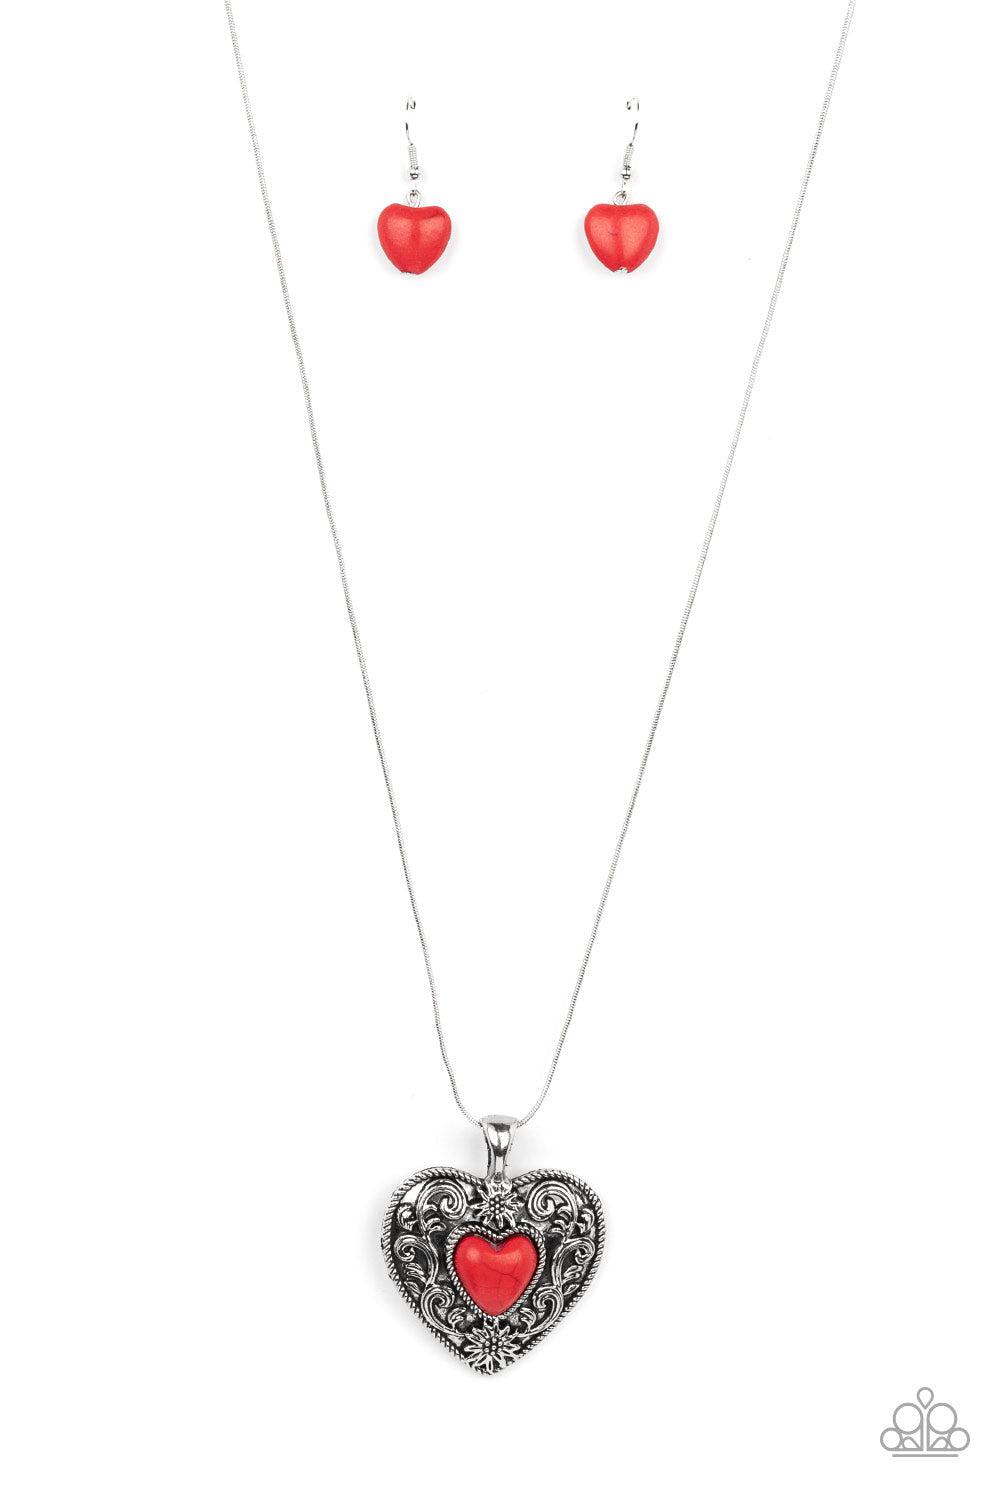 Wholeheartedly Whimsical Red Stone Heart Necklace - Paparazzi Accessories- lightbox - CarasShop.com - $5 Jewelry by Cara Jewels